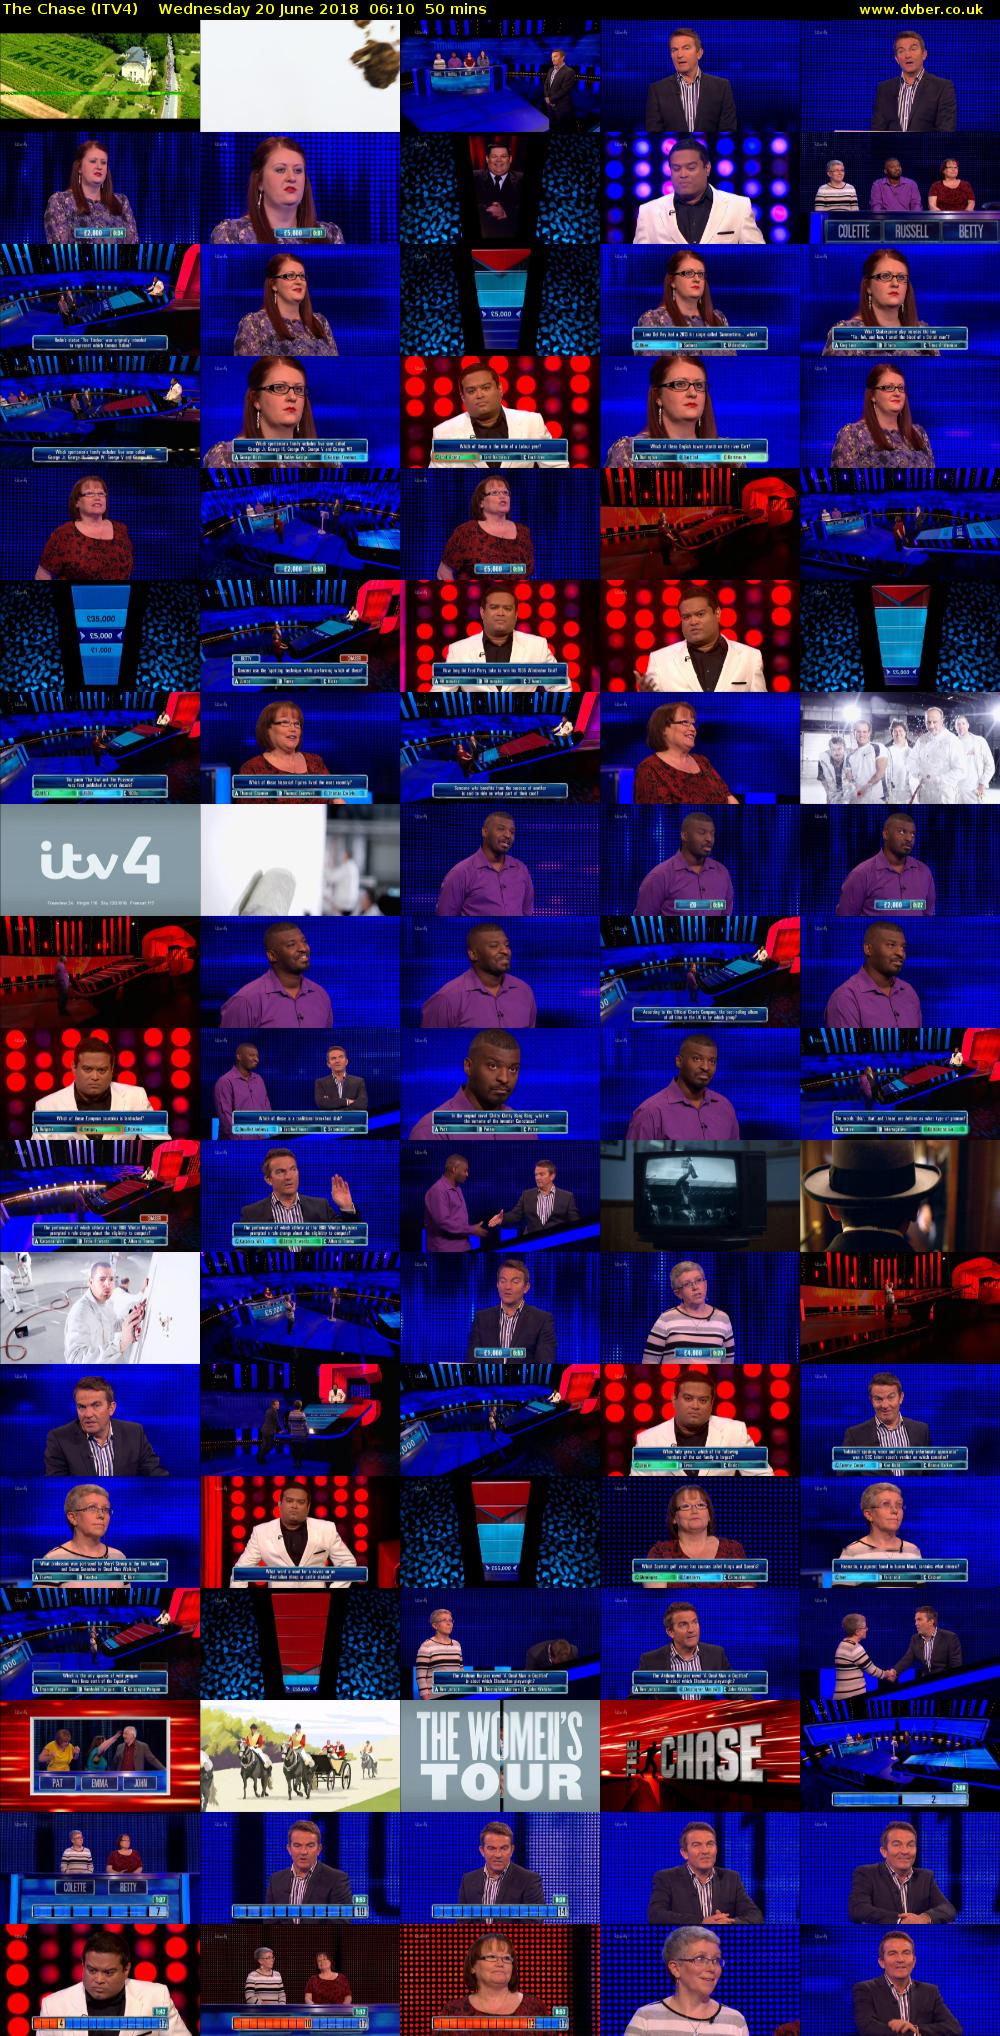 The Chase (ITV4) Wednesday 20 June 2018 06:10 - 07:00